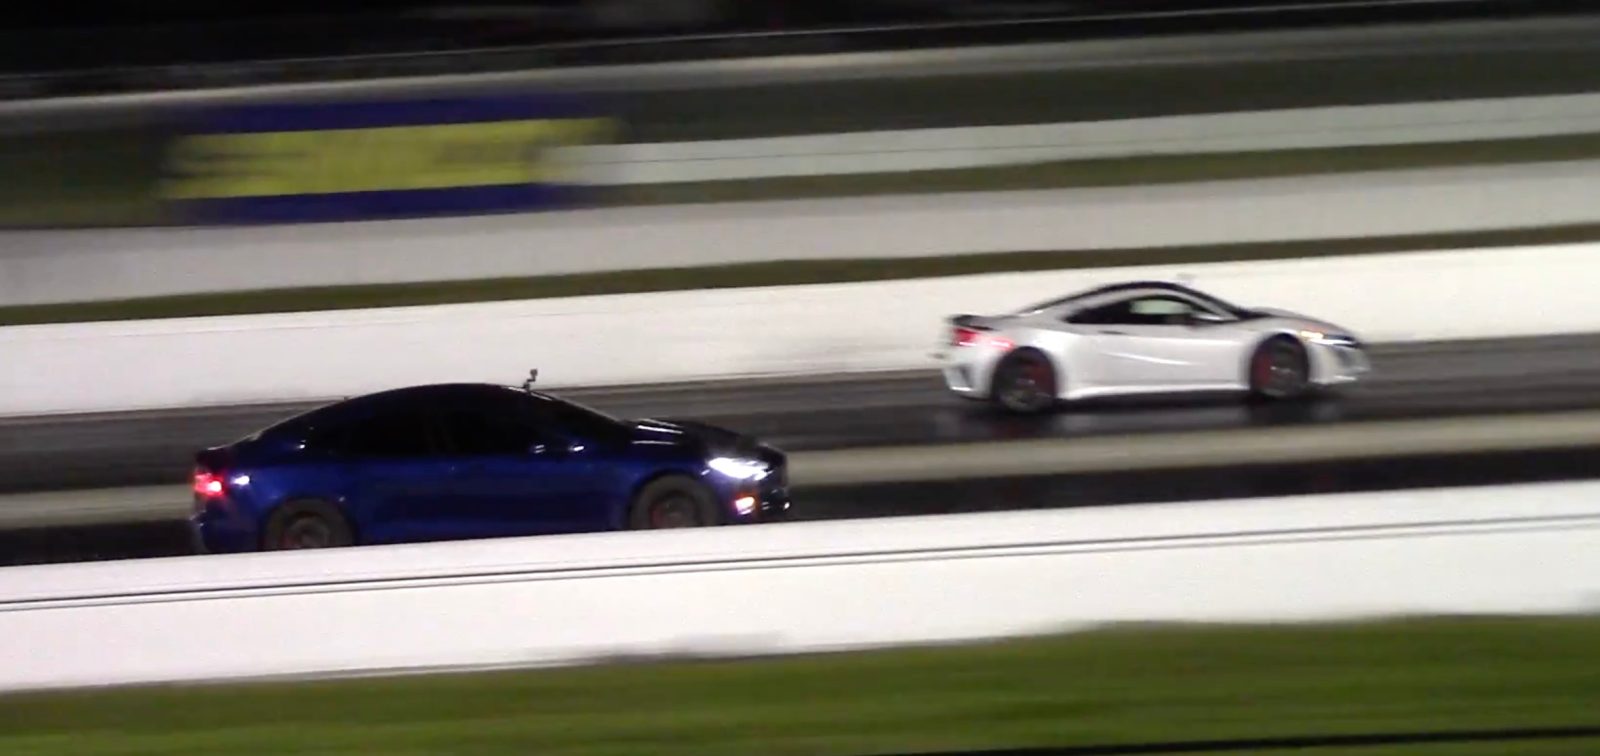 Tesla Model S P100d Ludicrous Vs New Acura Nsx All Electric